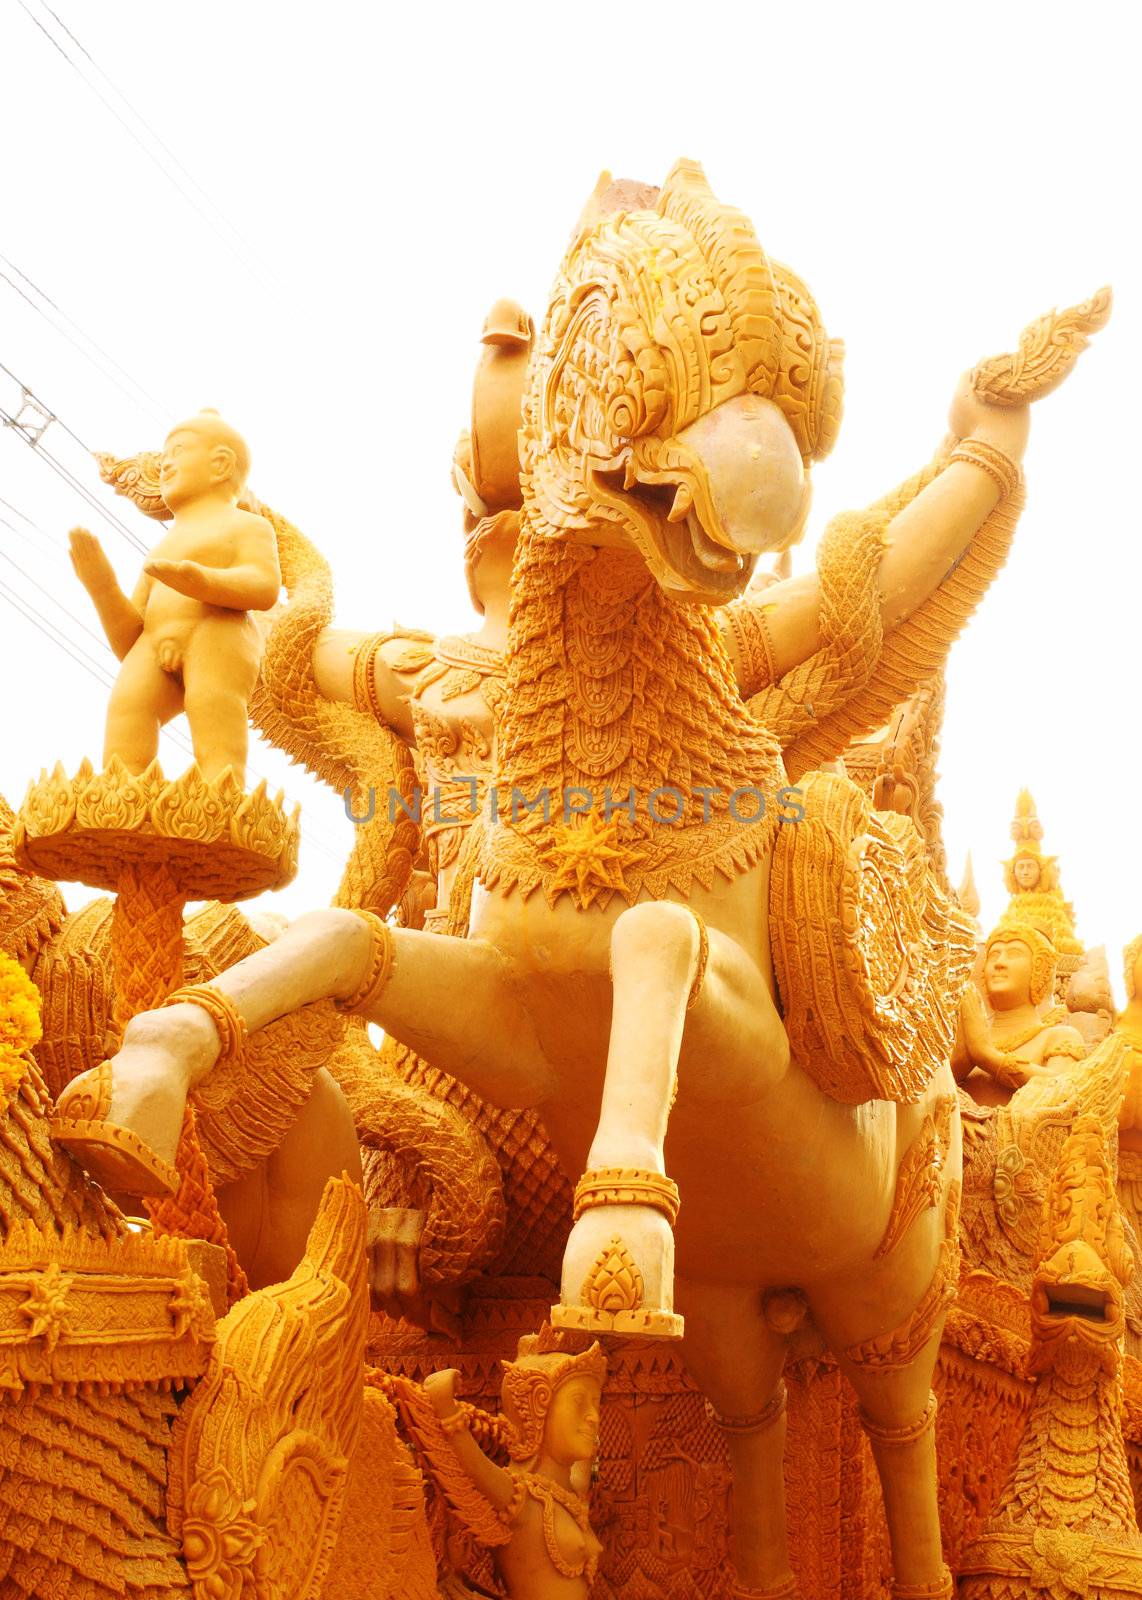 Horses carving candle festival, Thailand